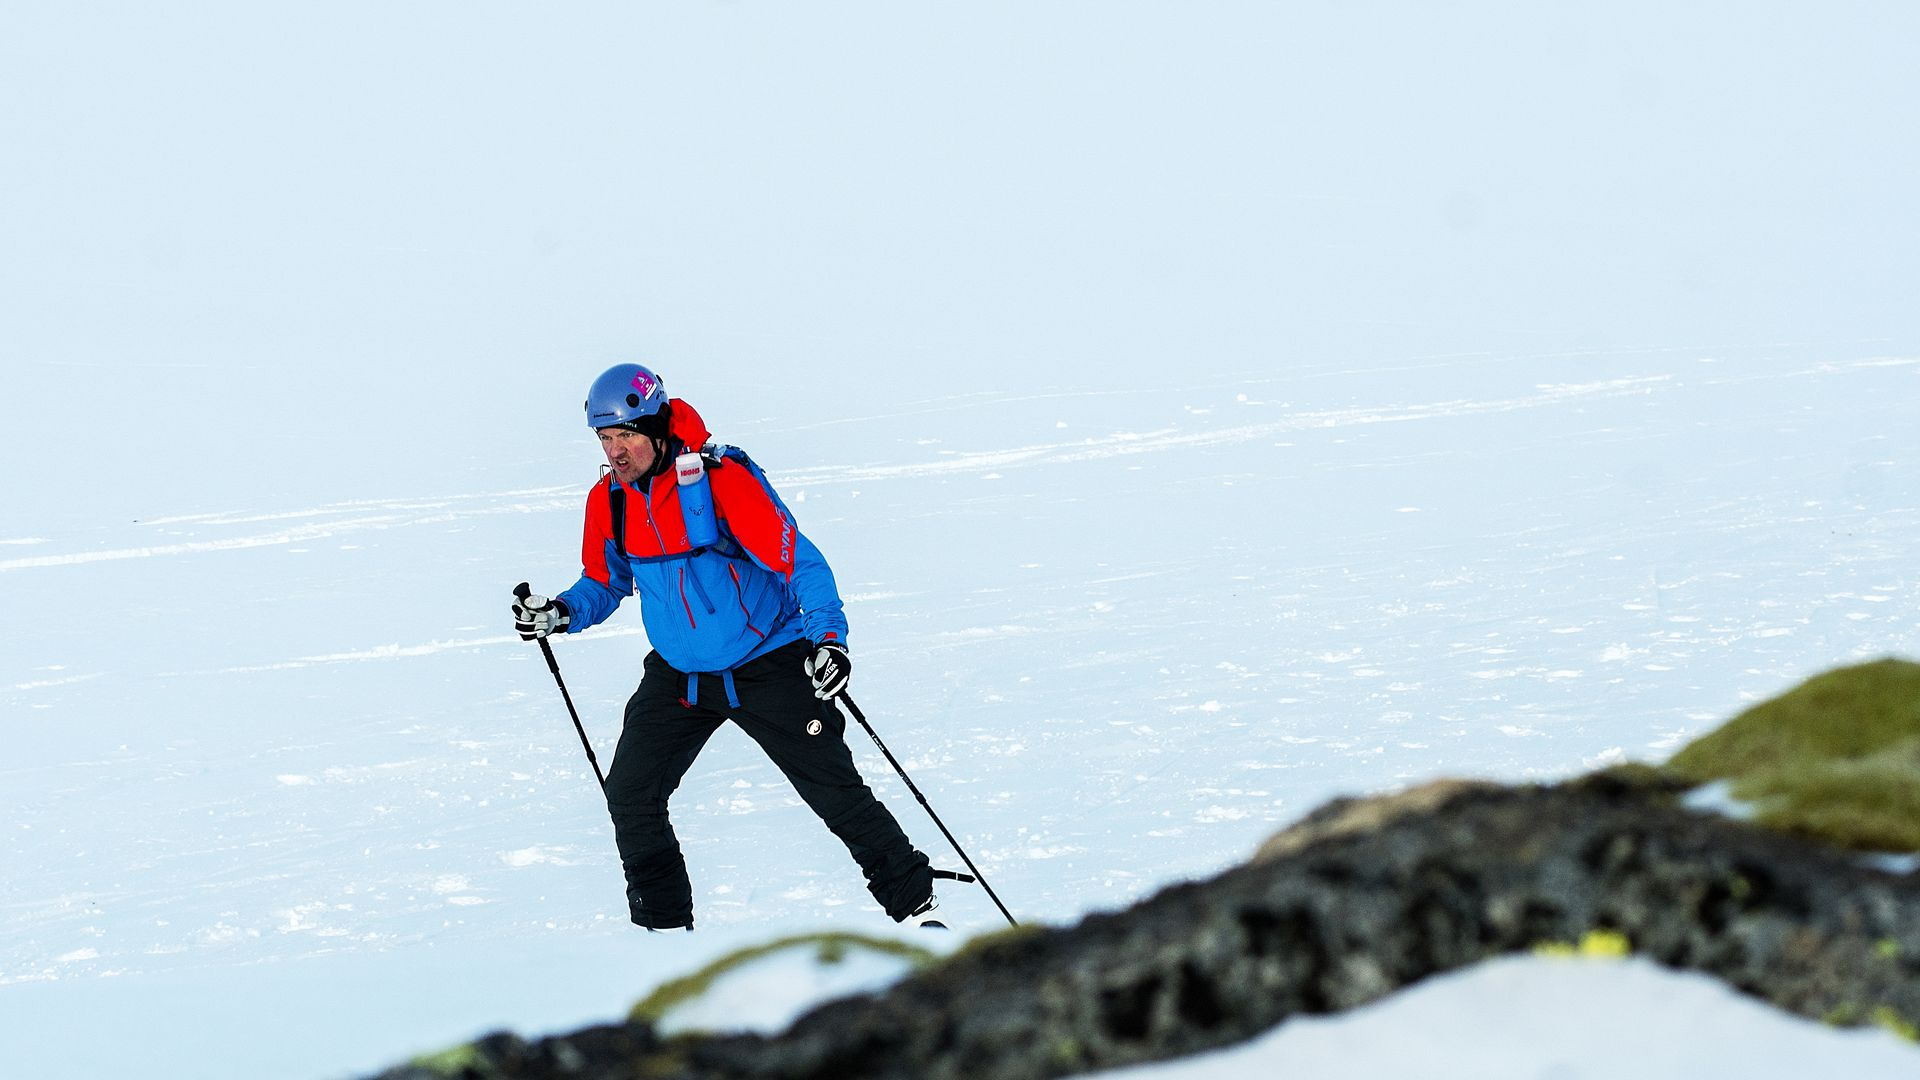 A contestant in a ski mountaineering race.